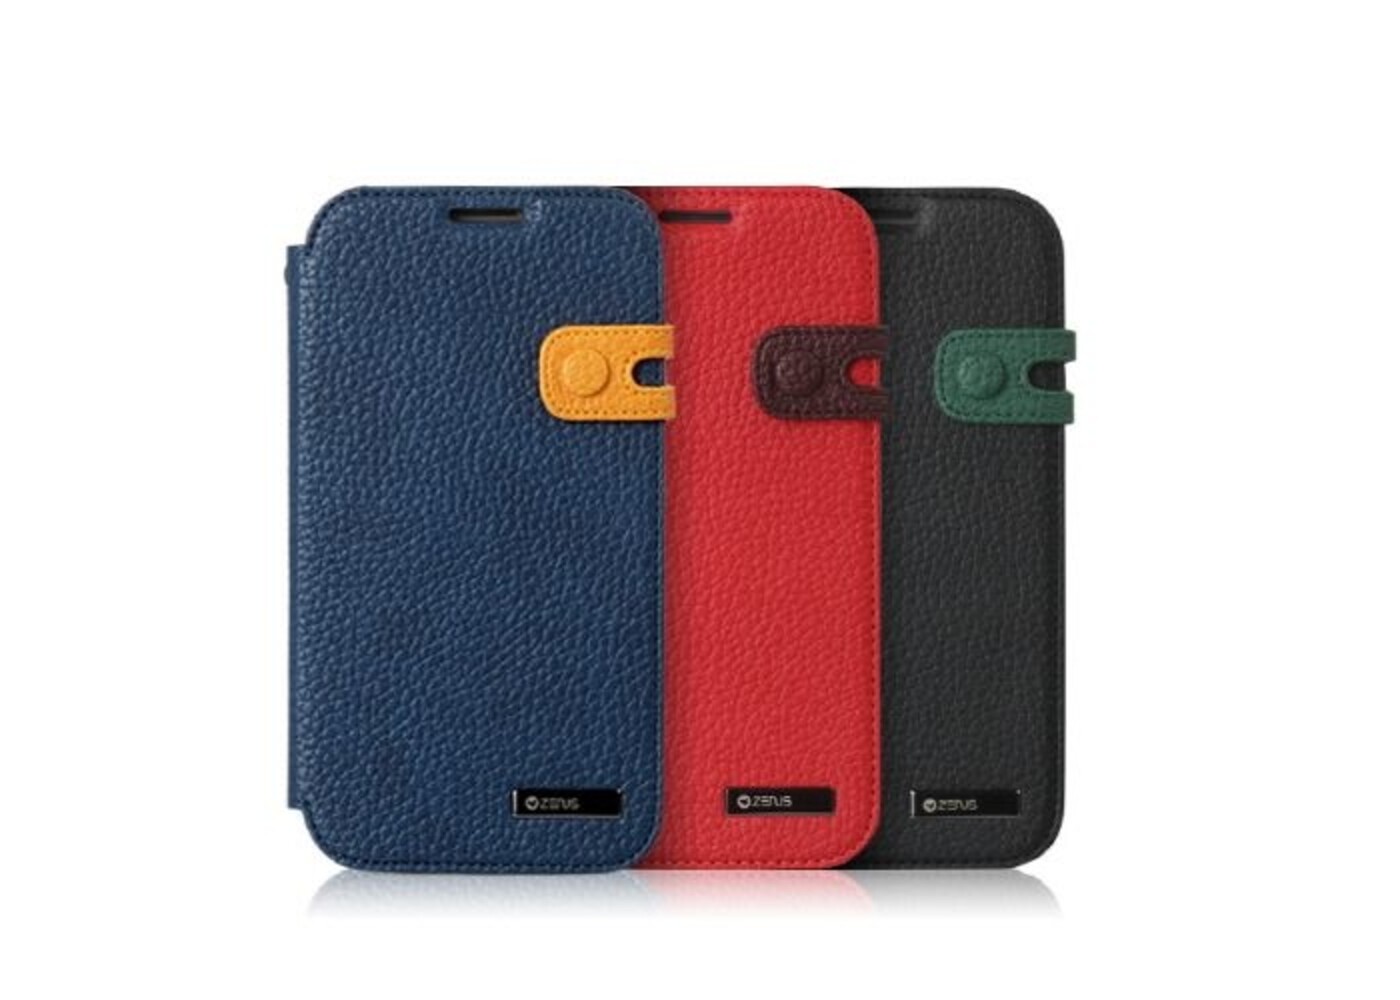 Zenus Galaxy Note 2 Masstige Color Edge Diary Series -Red